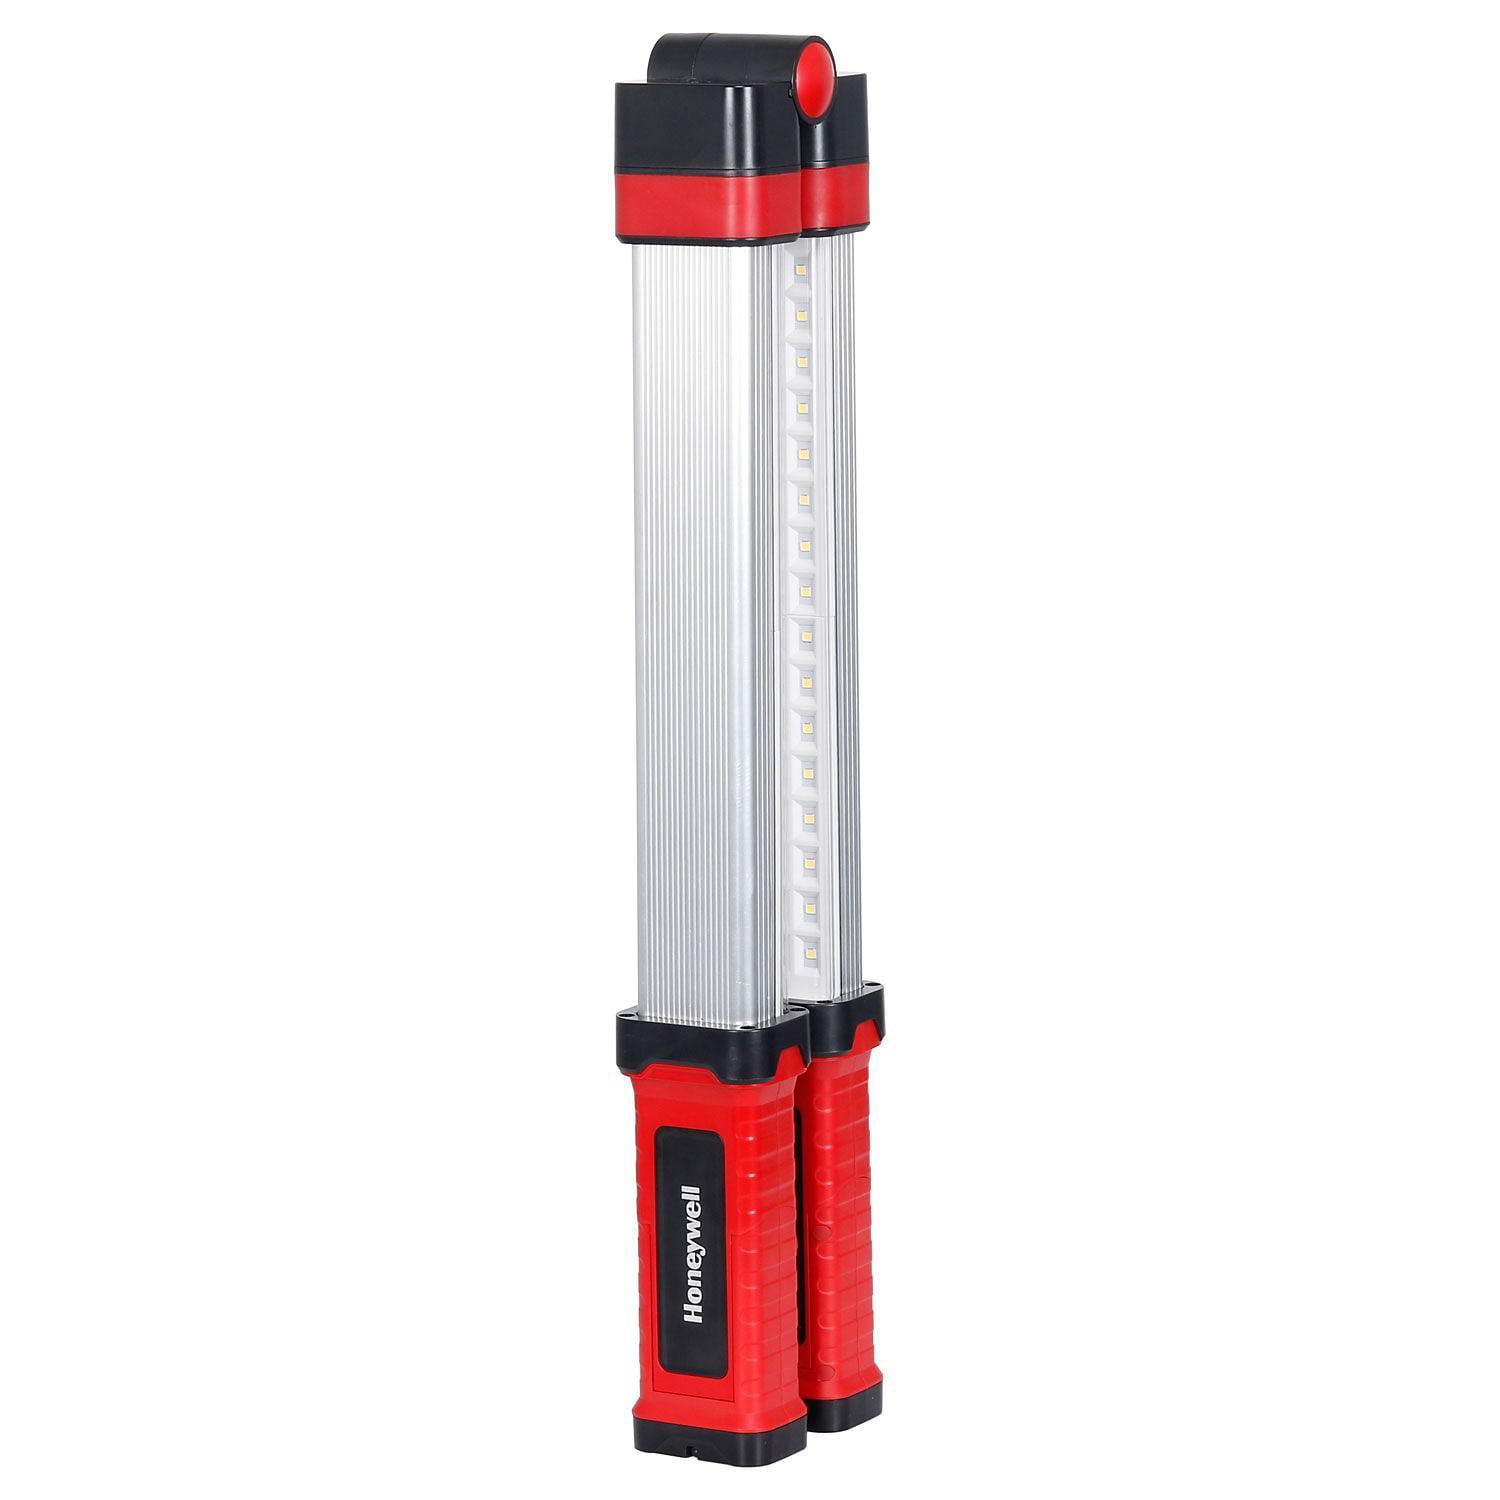 Honeywell 1200 Lumen Collapsible Multi-Function Rechargeable Work Light 